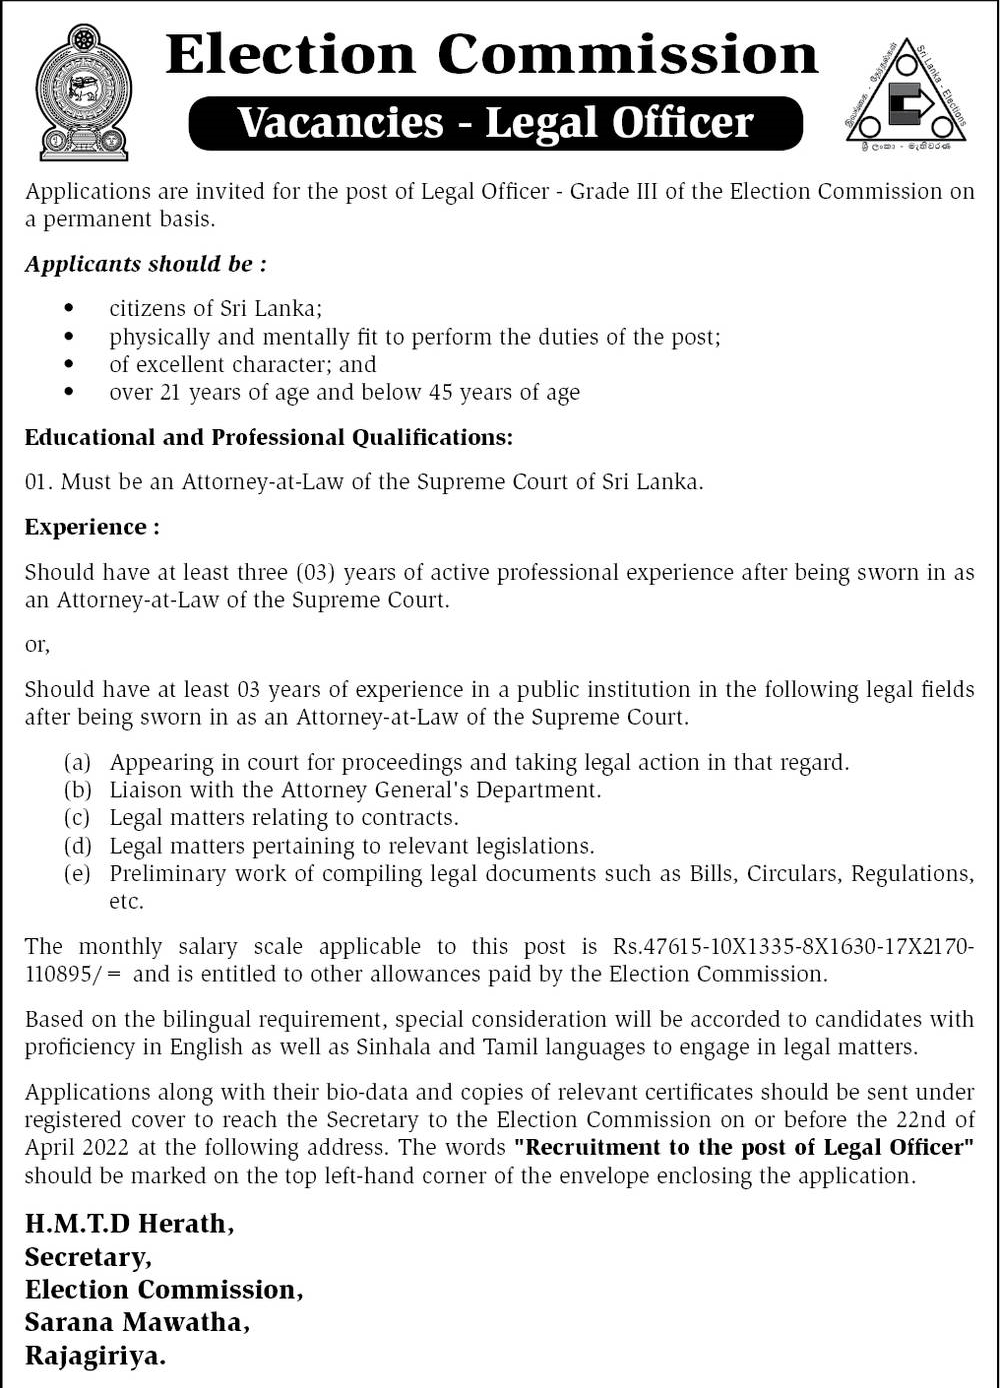 Election Commission of Sri Lanka Vacancies 2022 of Legal Officer